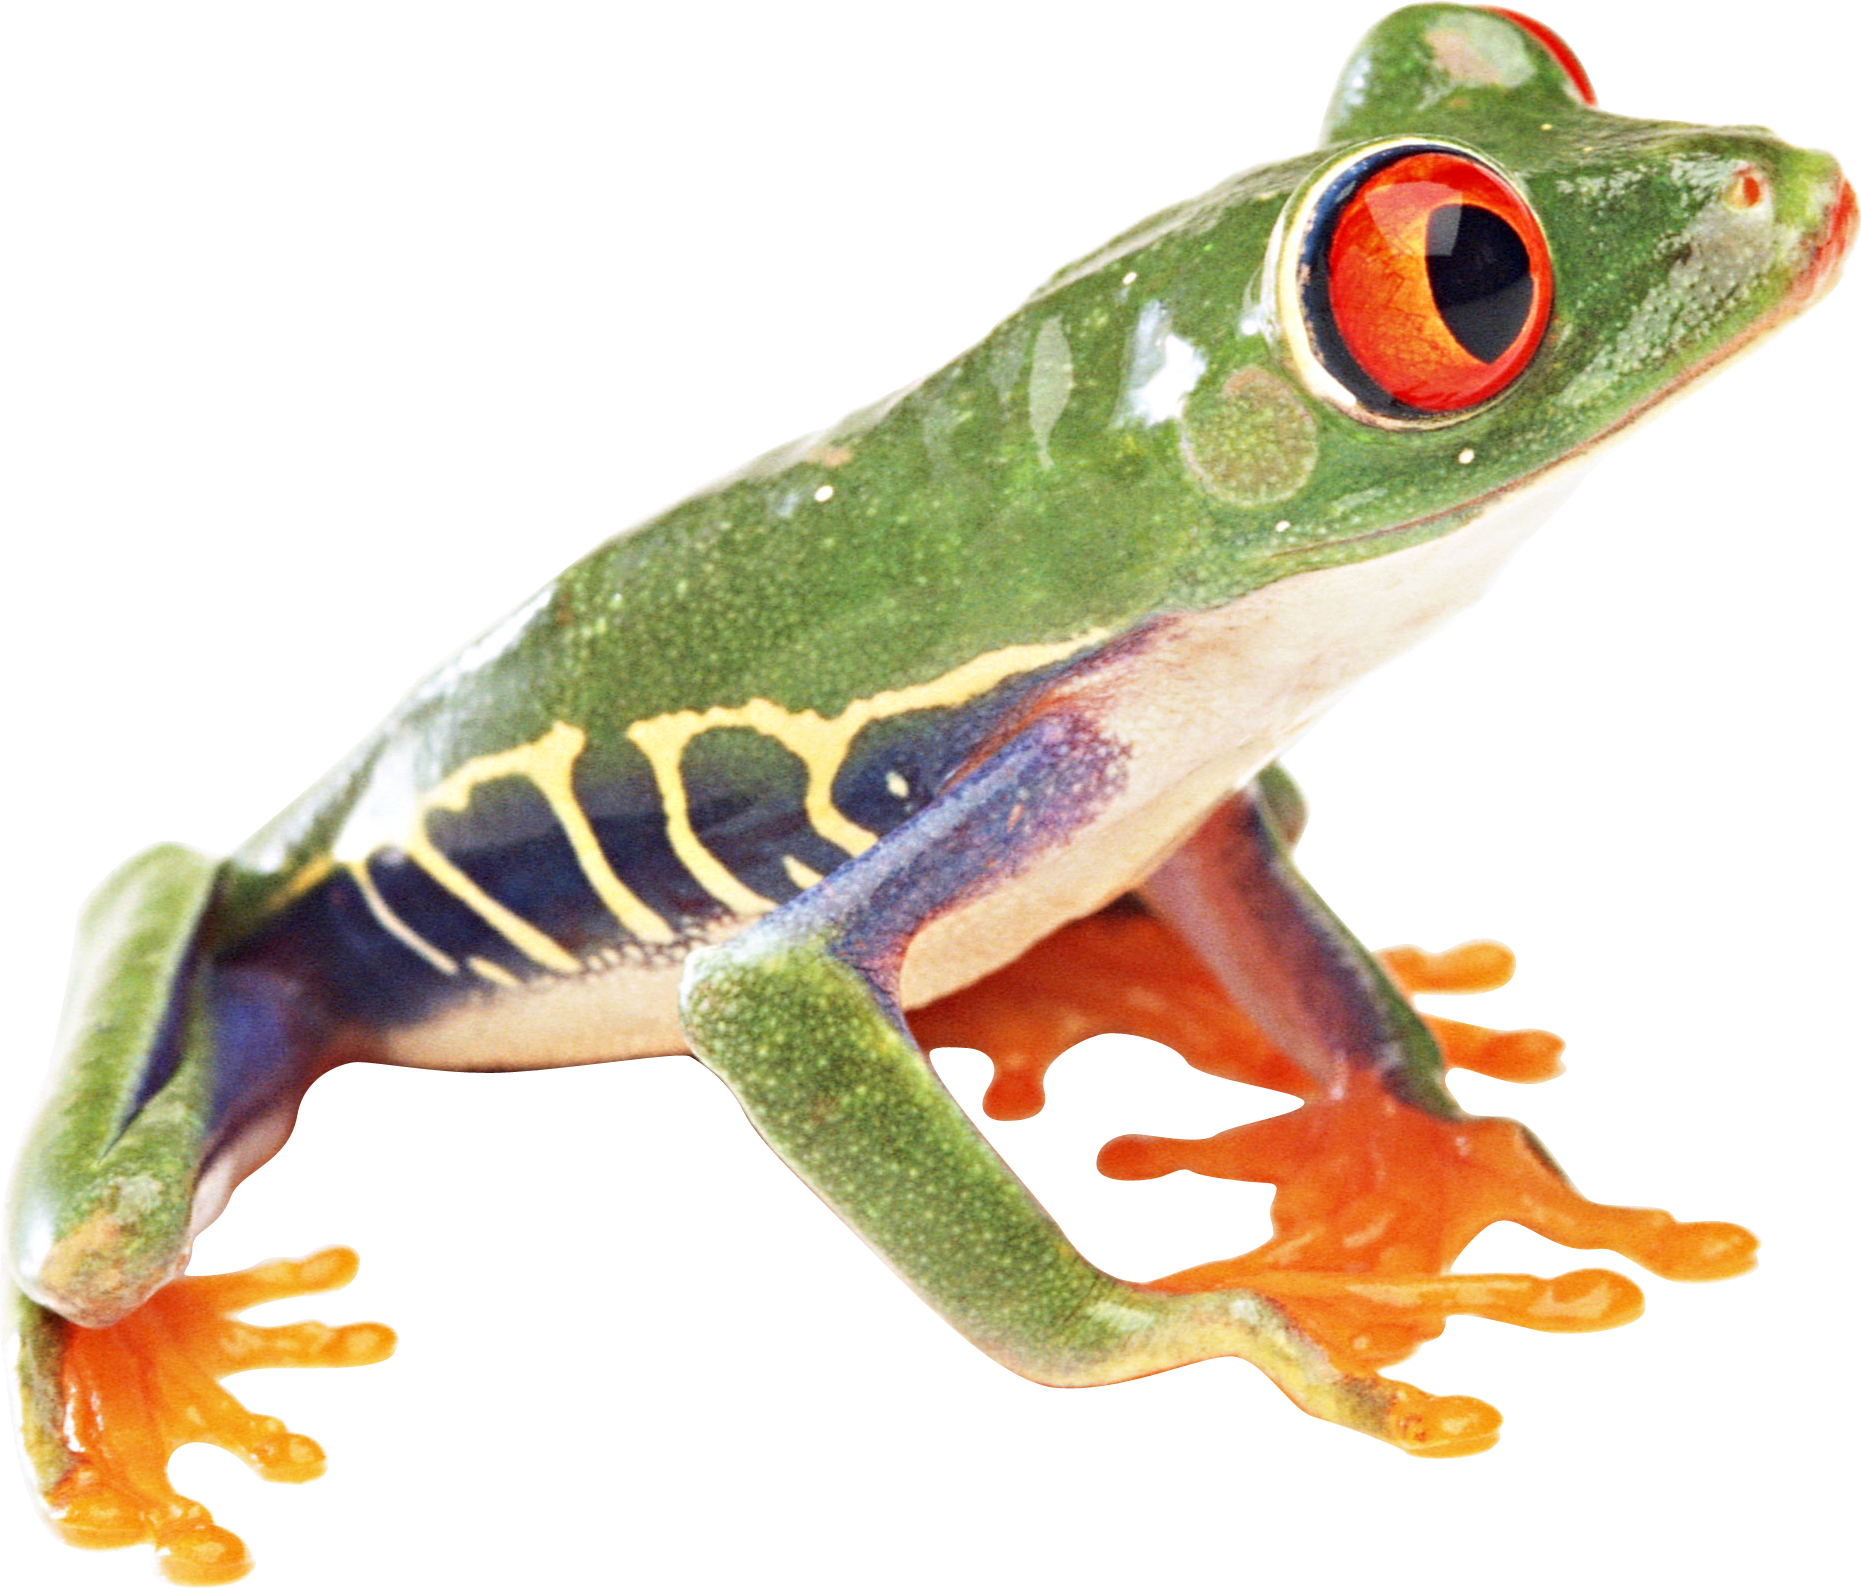 Frog png image best. Rainforest clipart red eyed